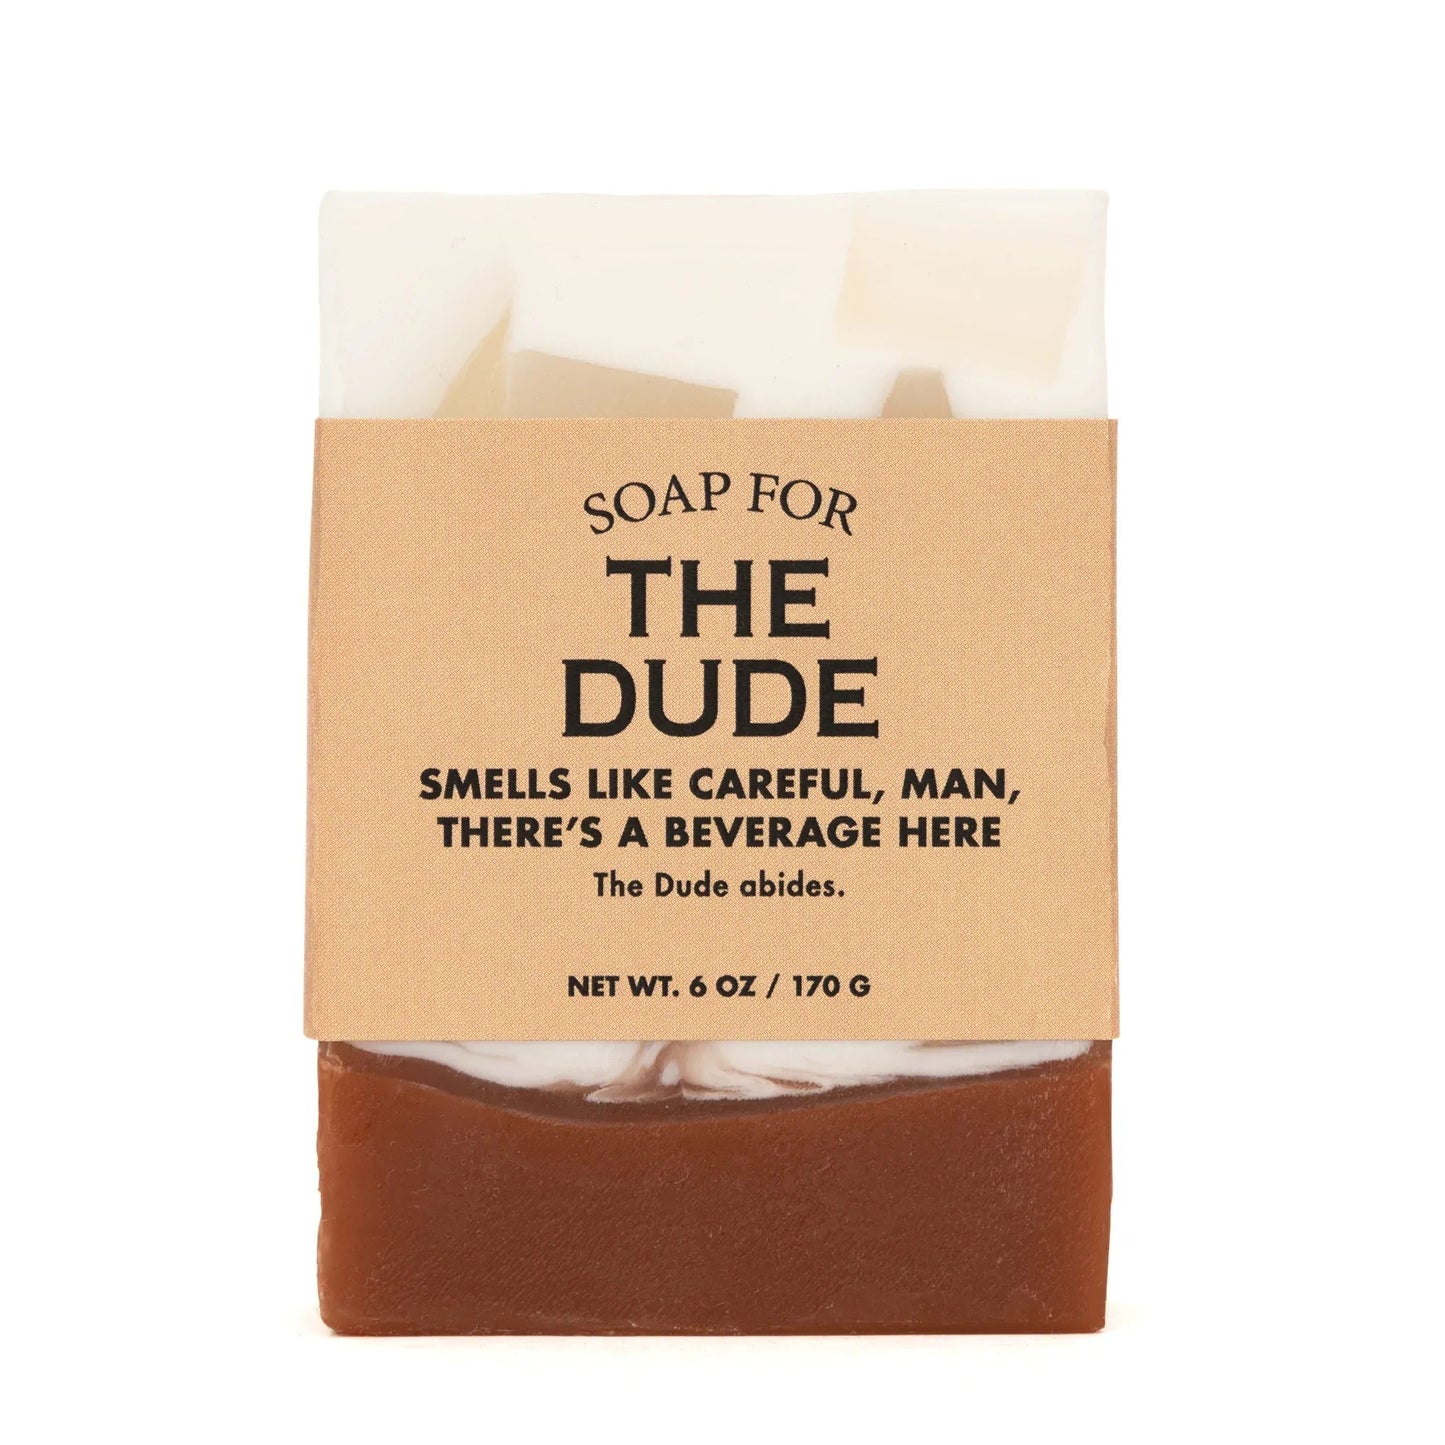 The Dude Soap